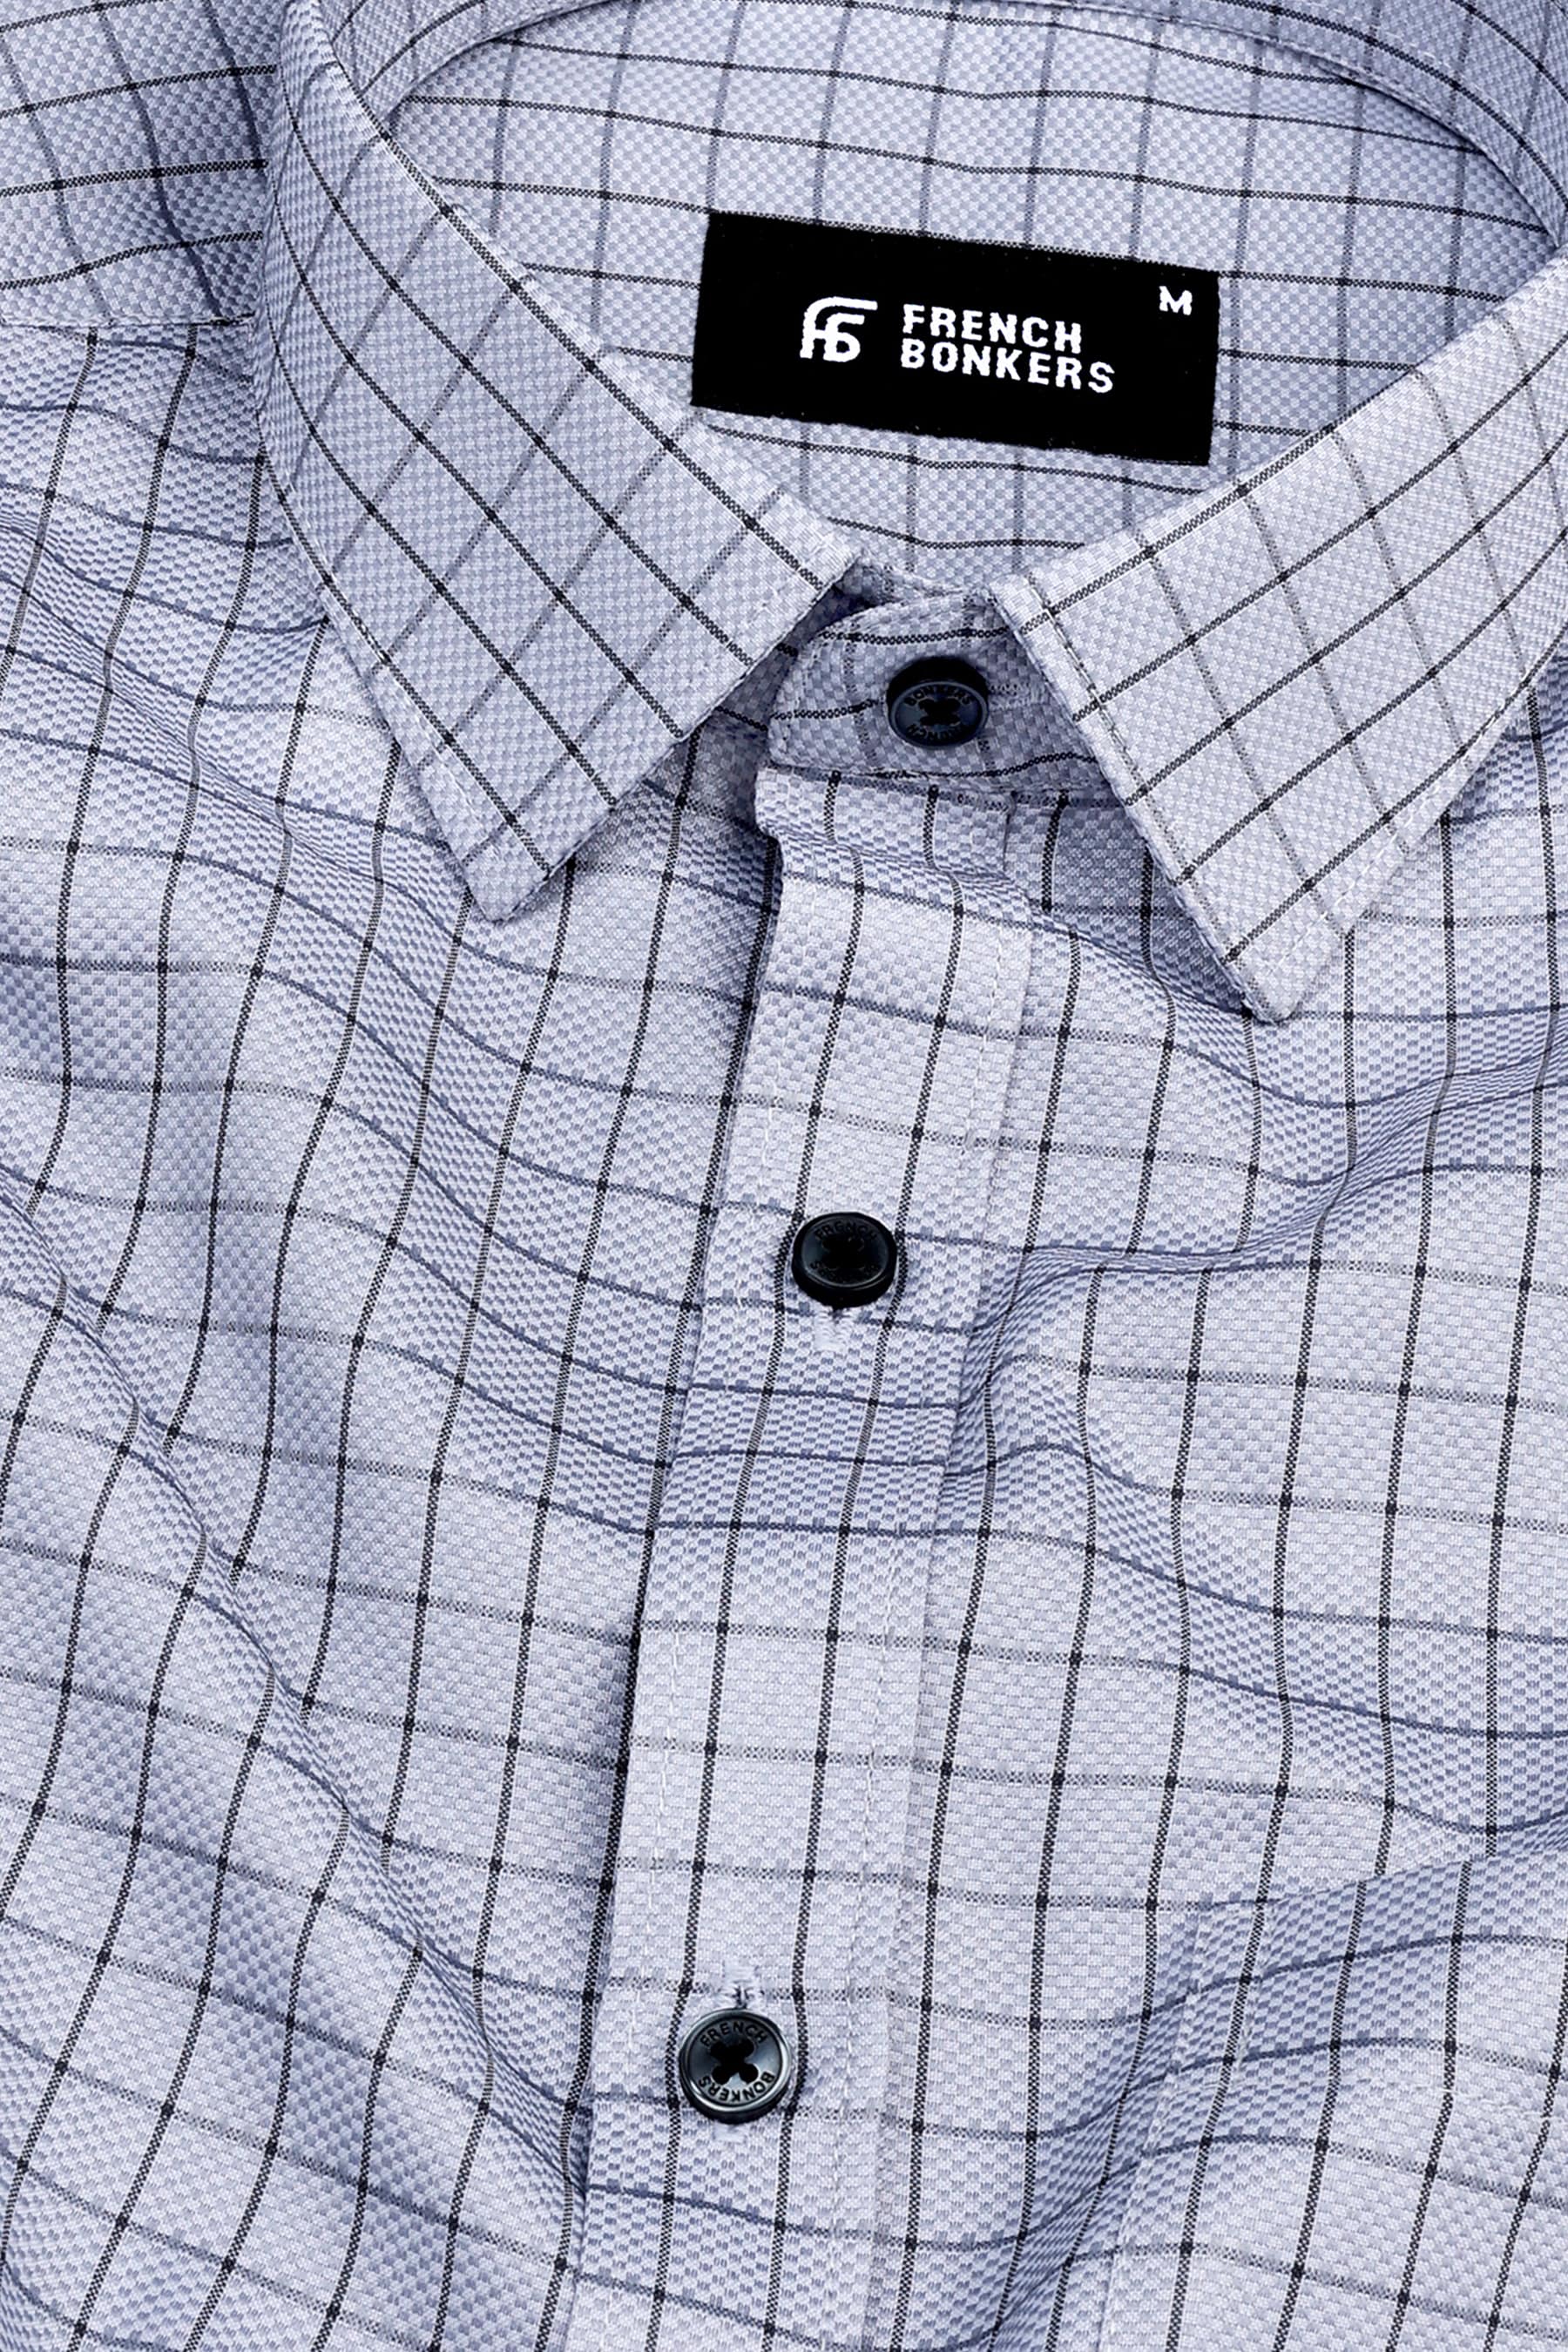 Charcoal grey with dark grey line check shirt